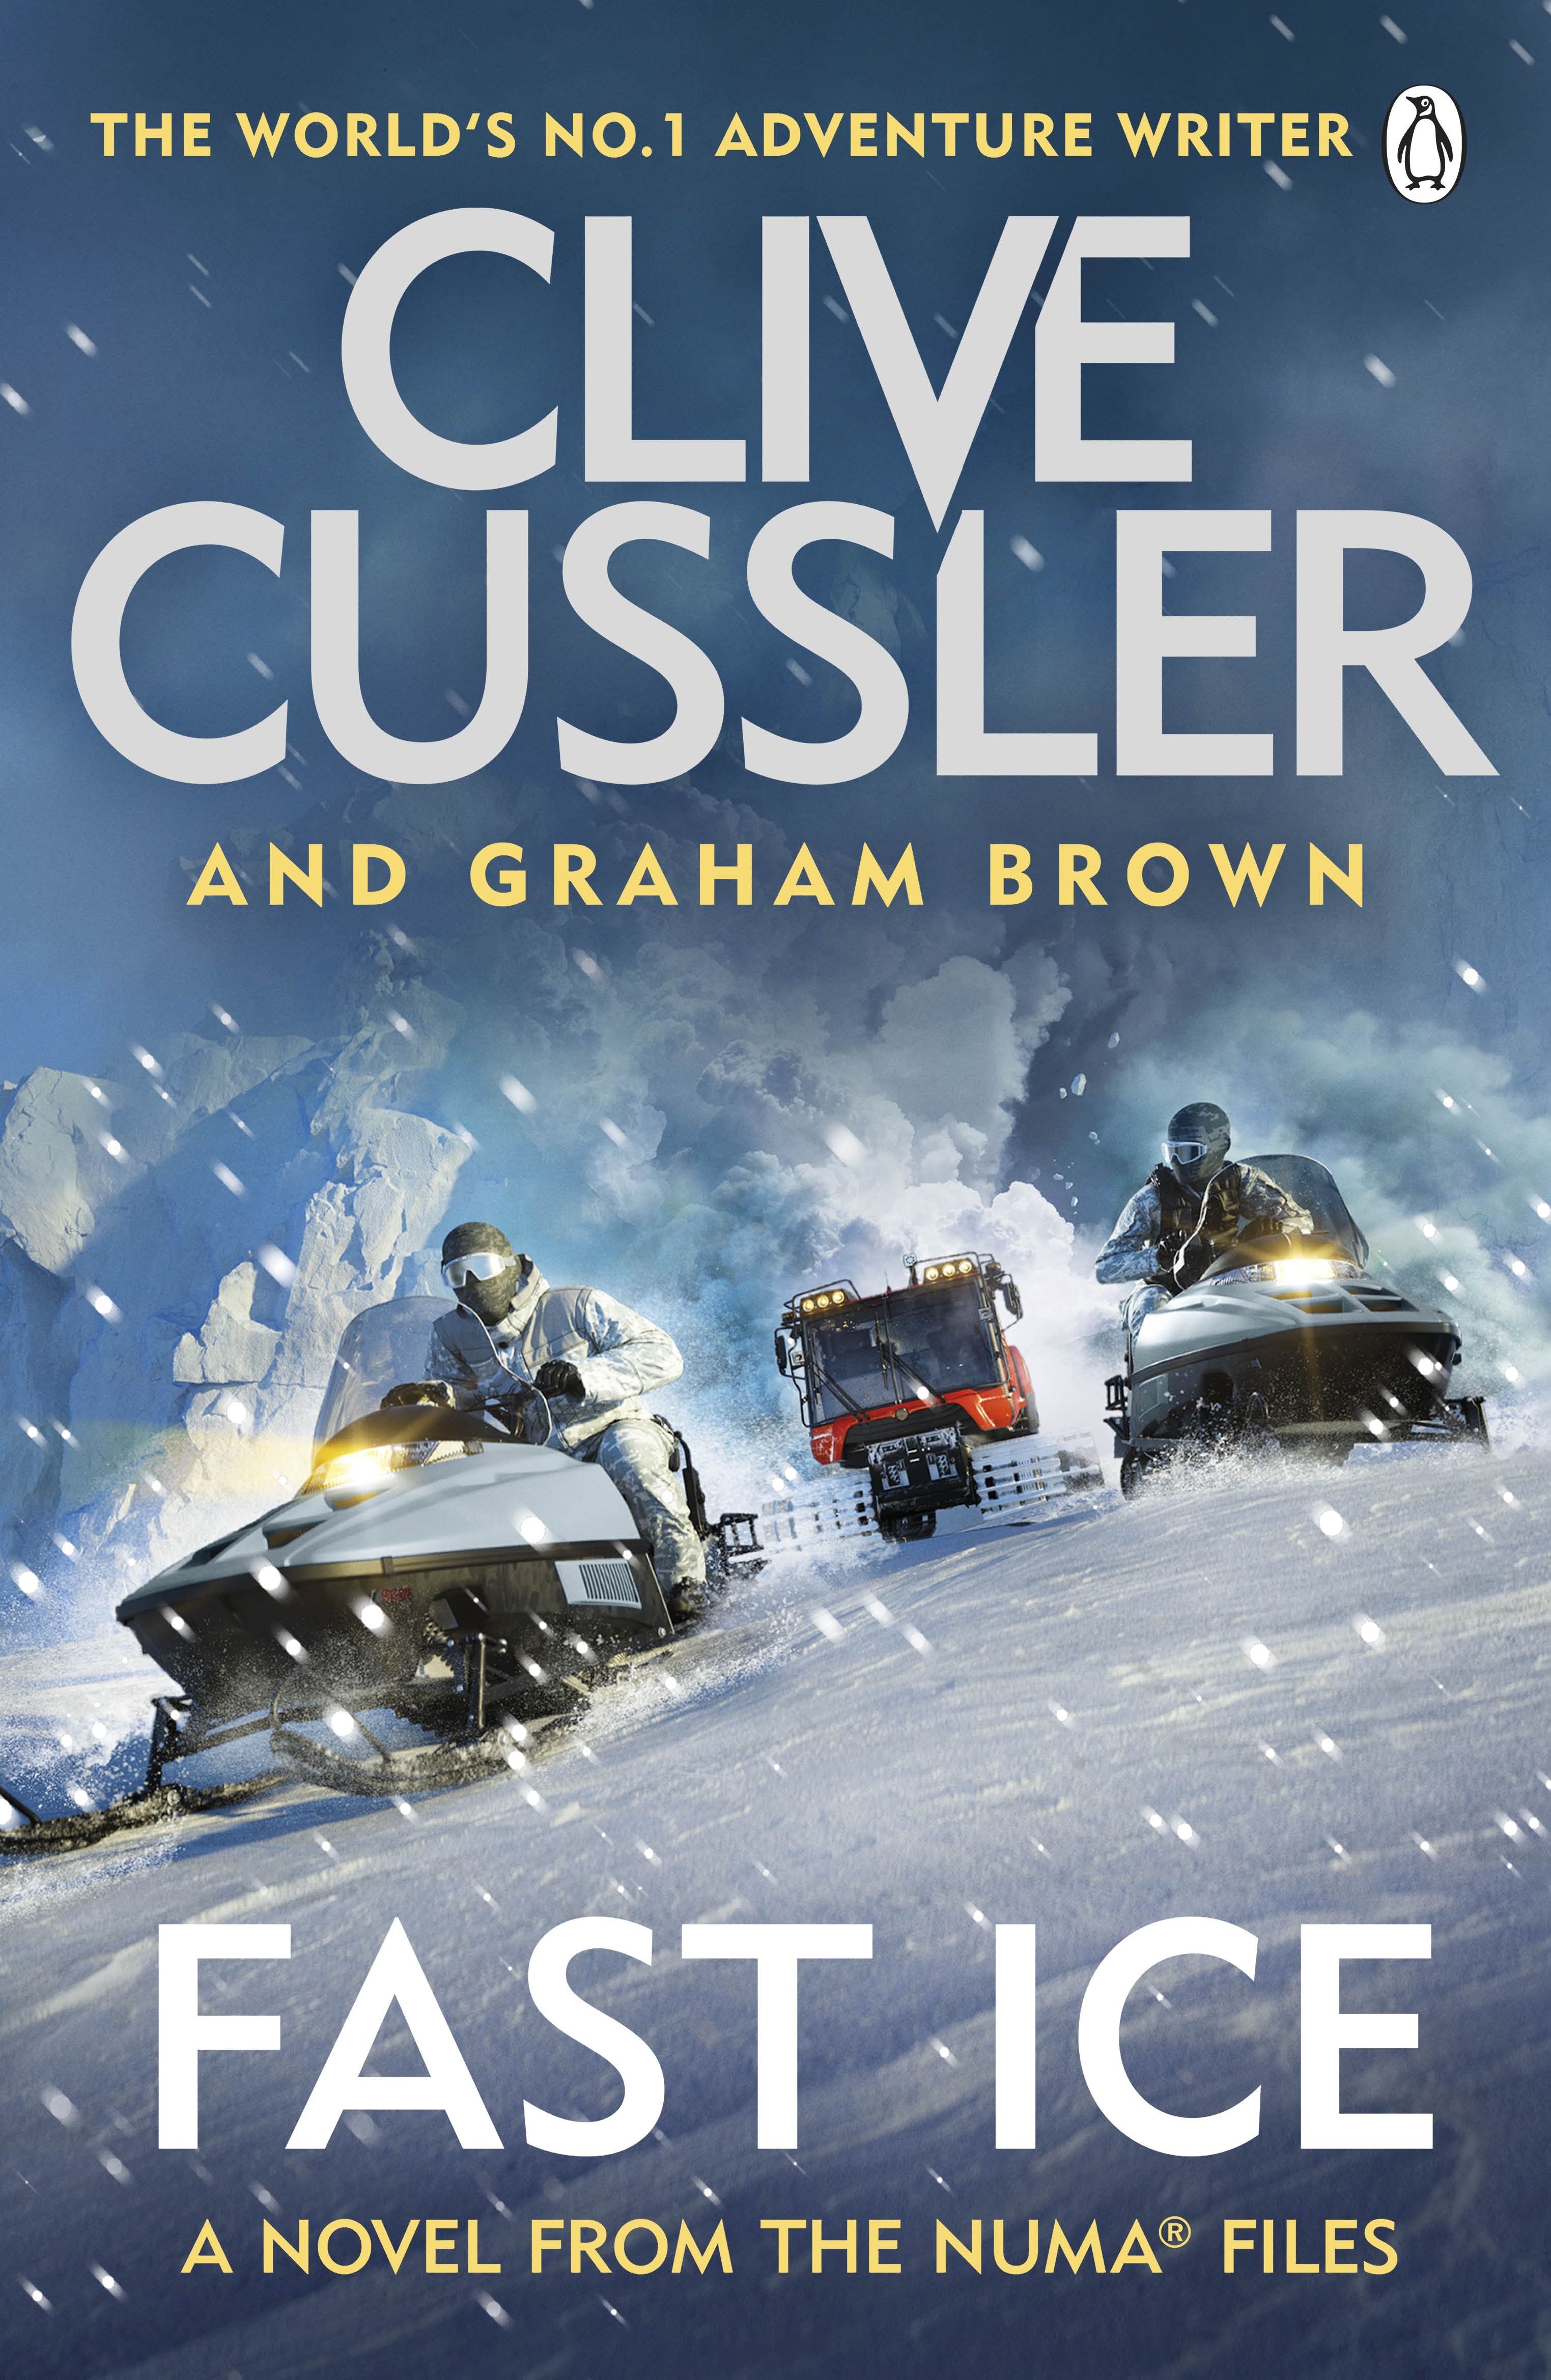 Book “Fast Ice” by Clive Cussler, Graham Brown — January 20, 2022